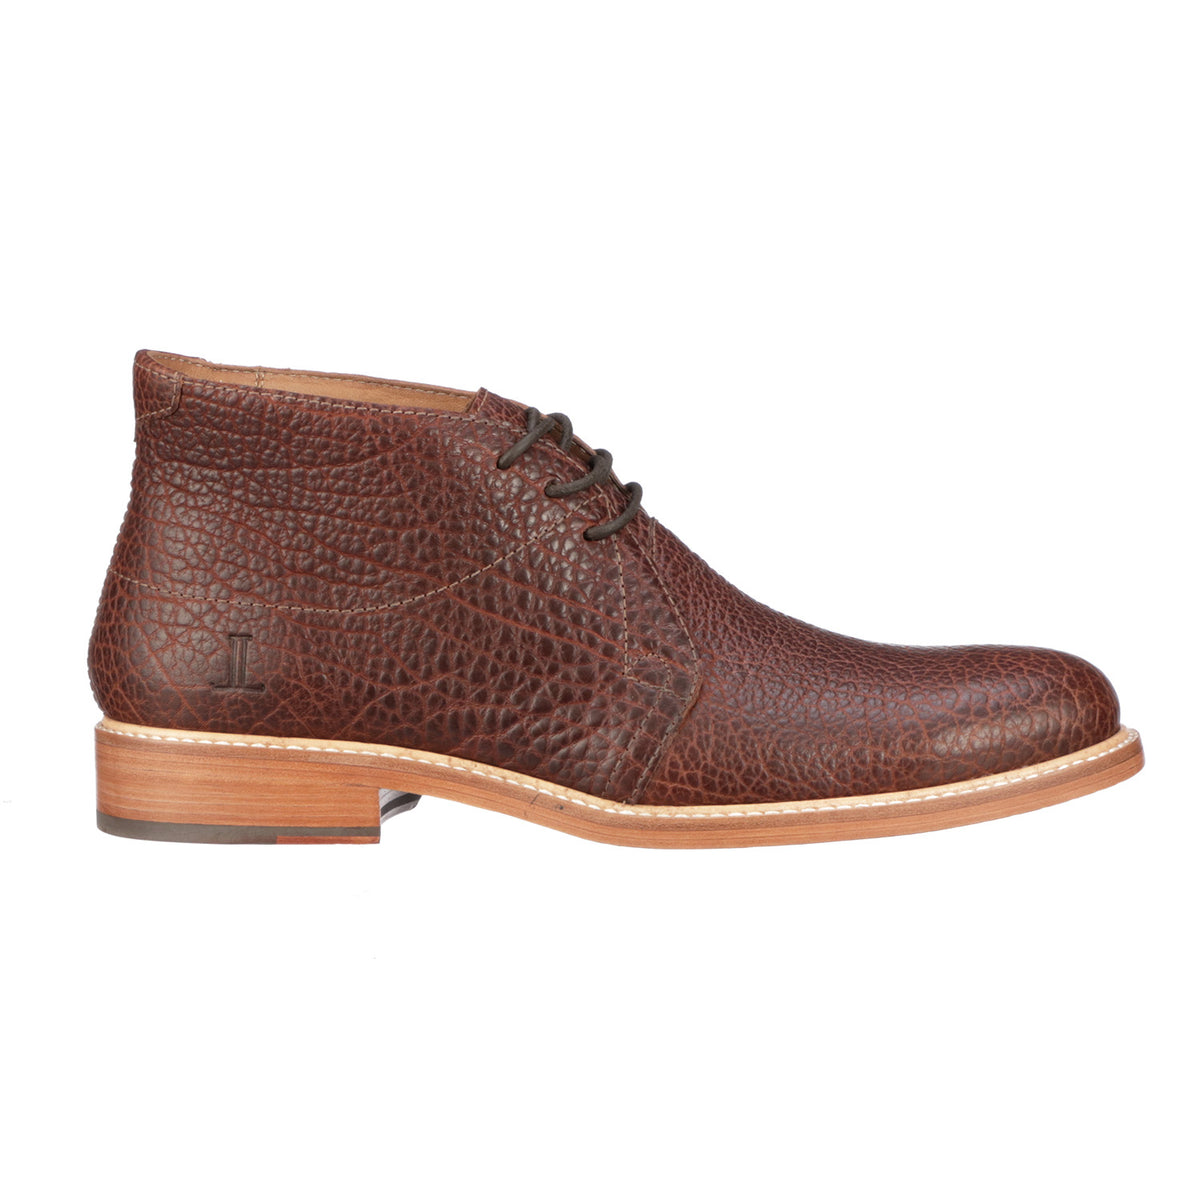 After-Ride Chukka Boot :: Whiskey